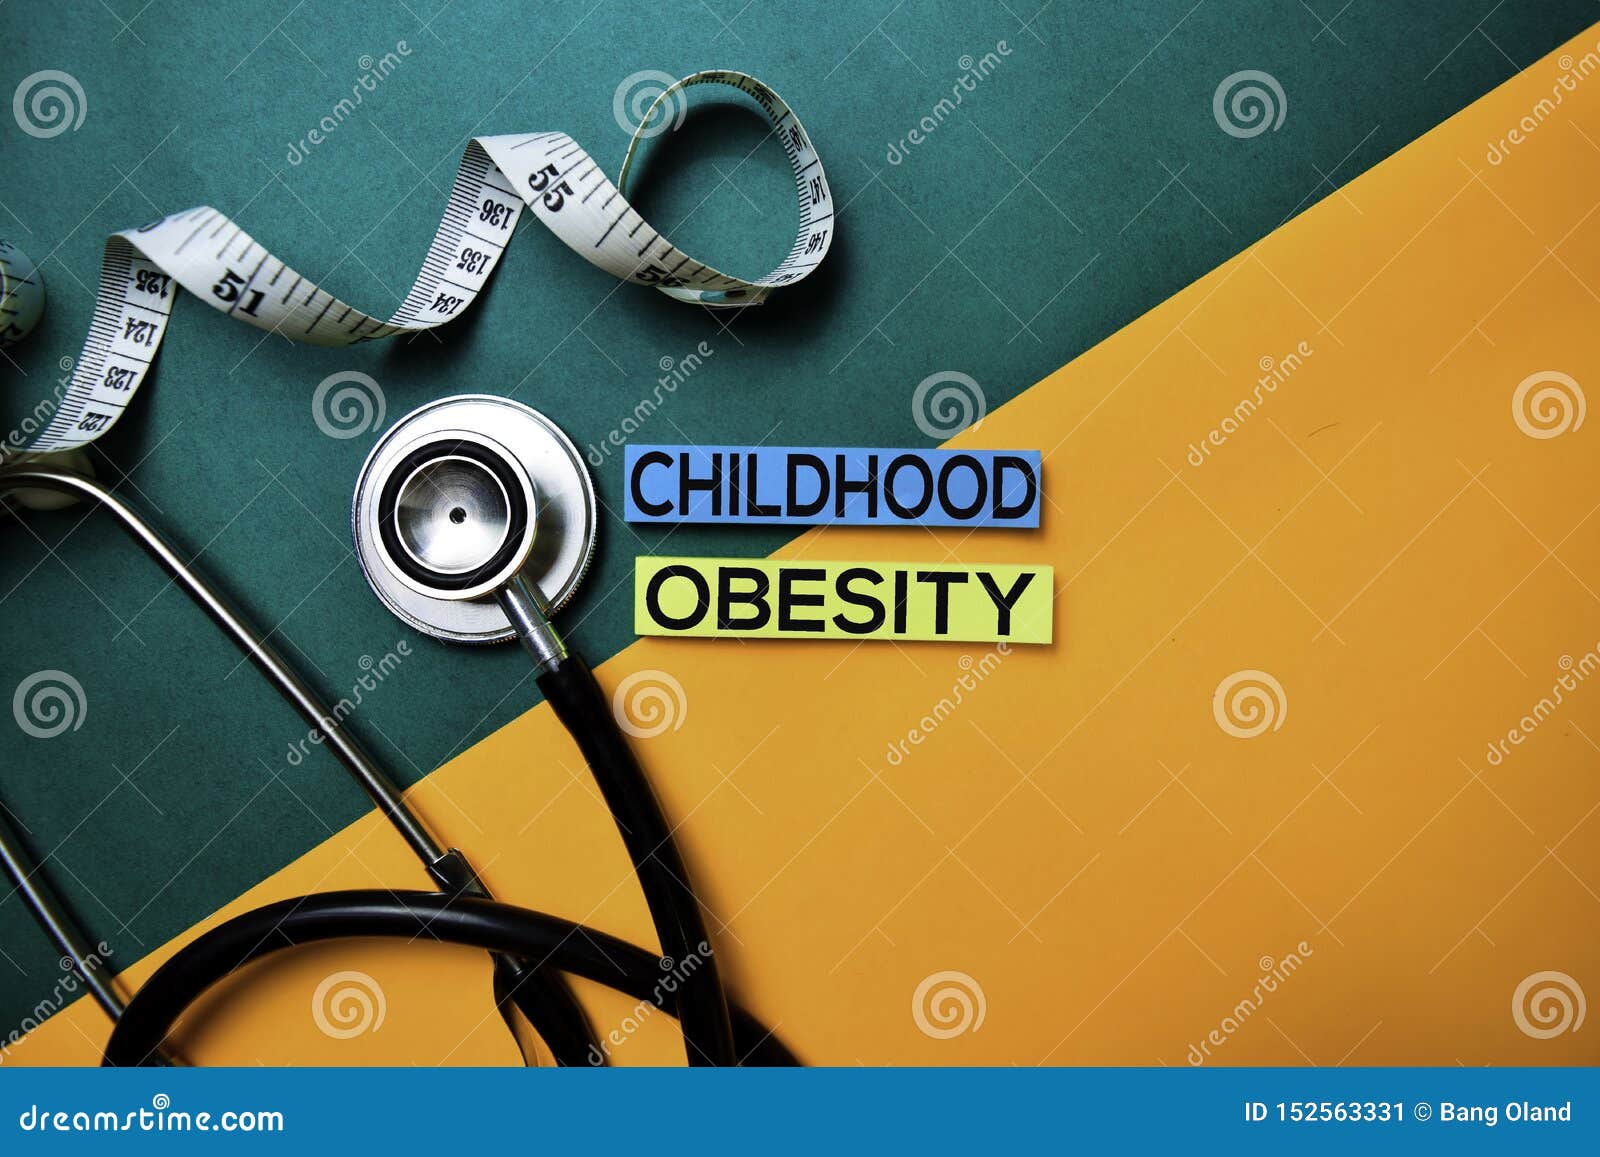 childhood obesity text on top view color table and healthcare/medical concept